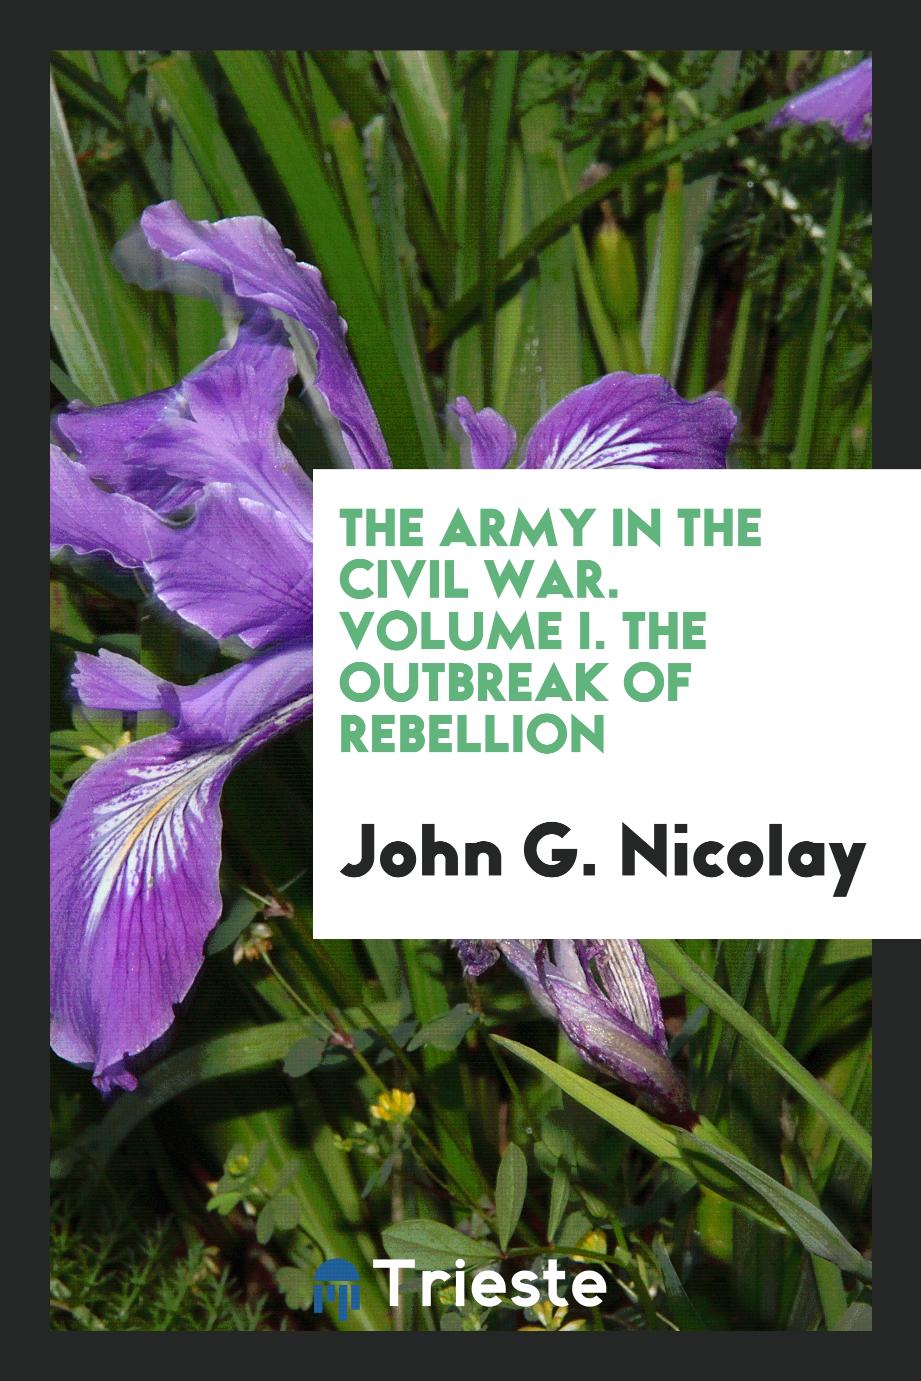 The Army in the Civil War. Volume I. The Outbreak of Rebellion